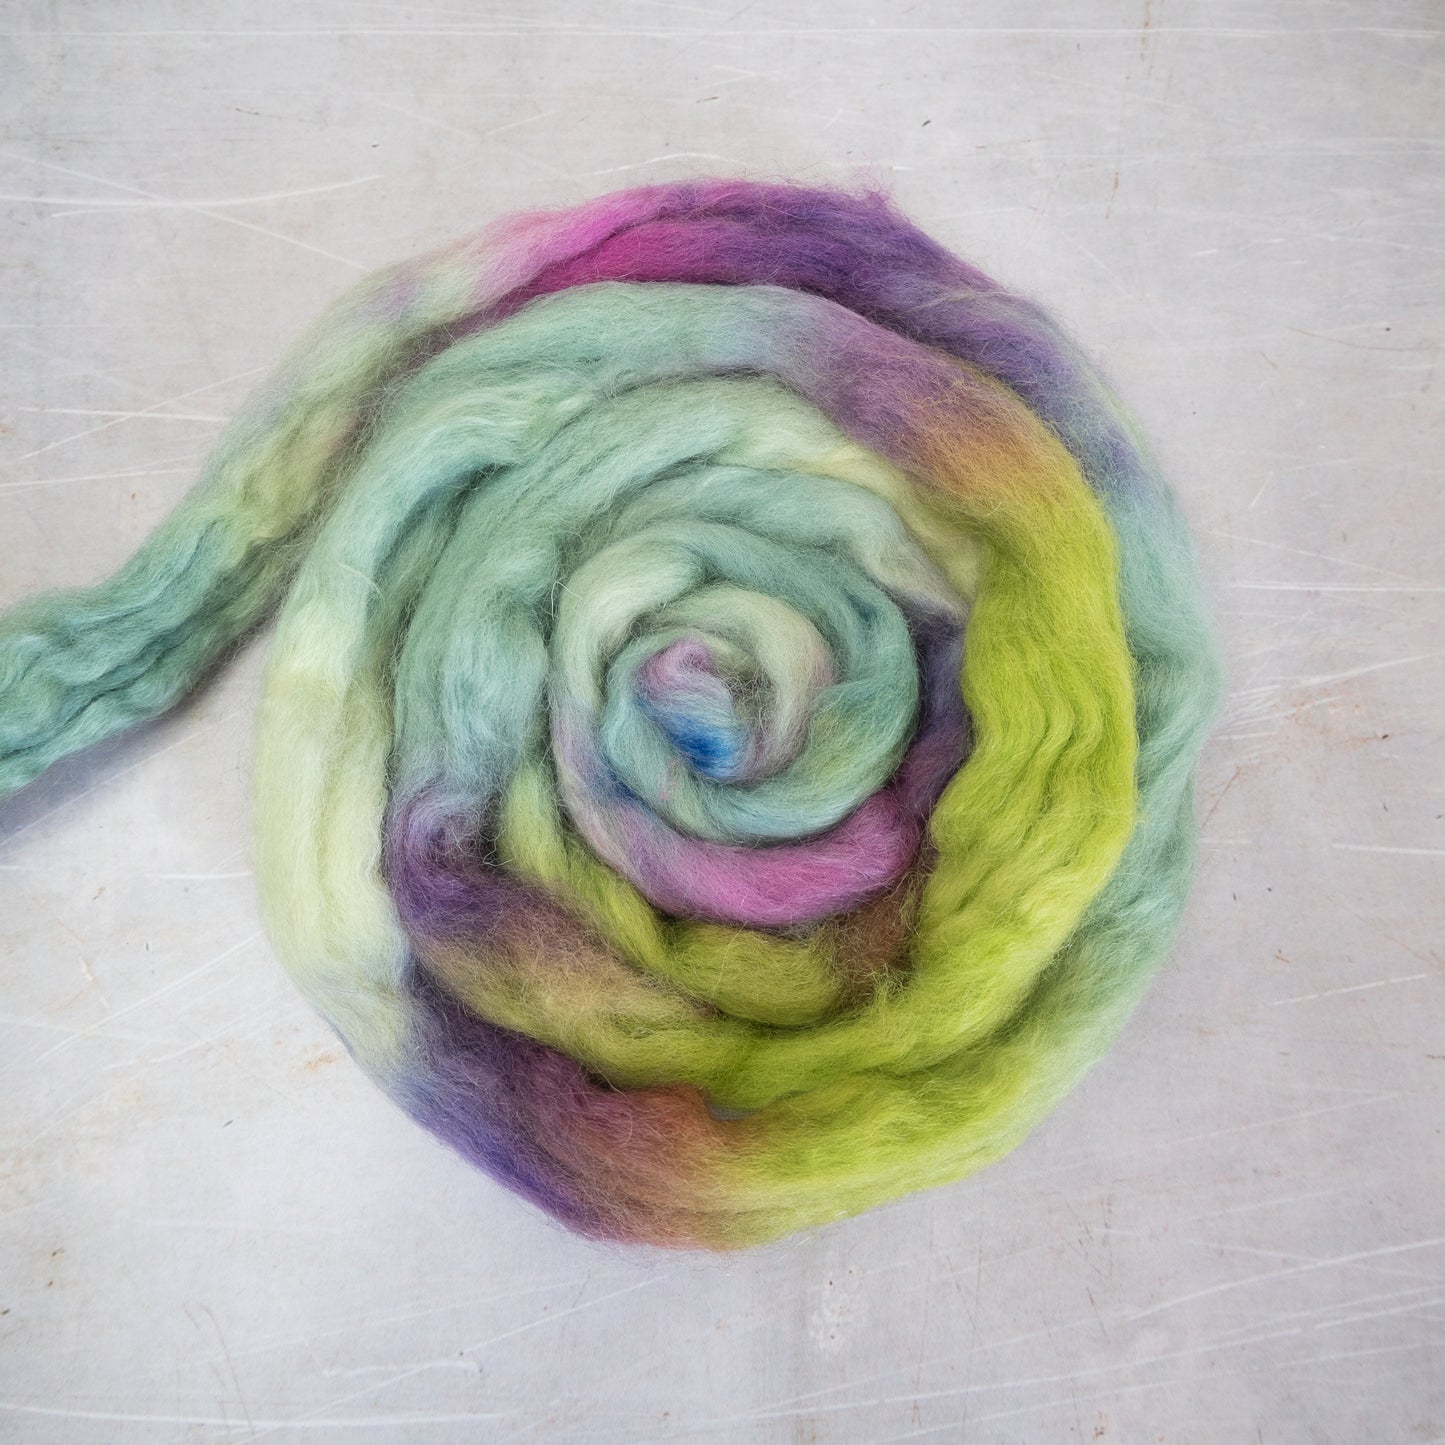 Giverny  - Romney/polwarth/mohair